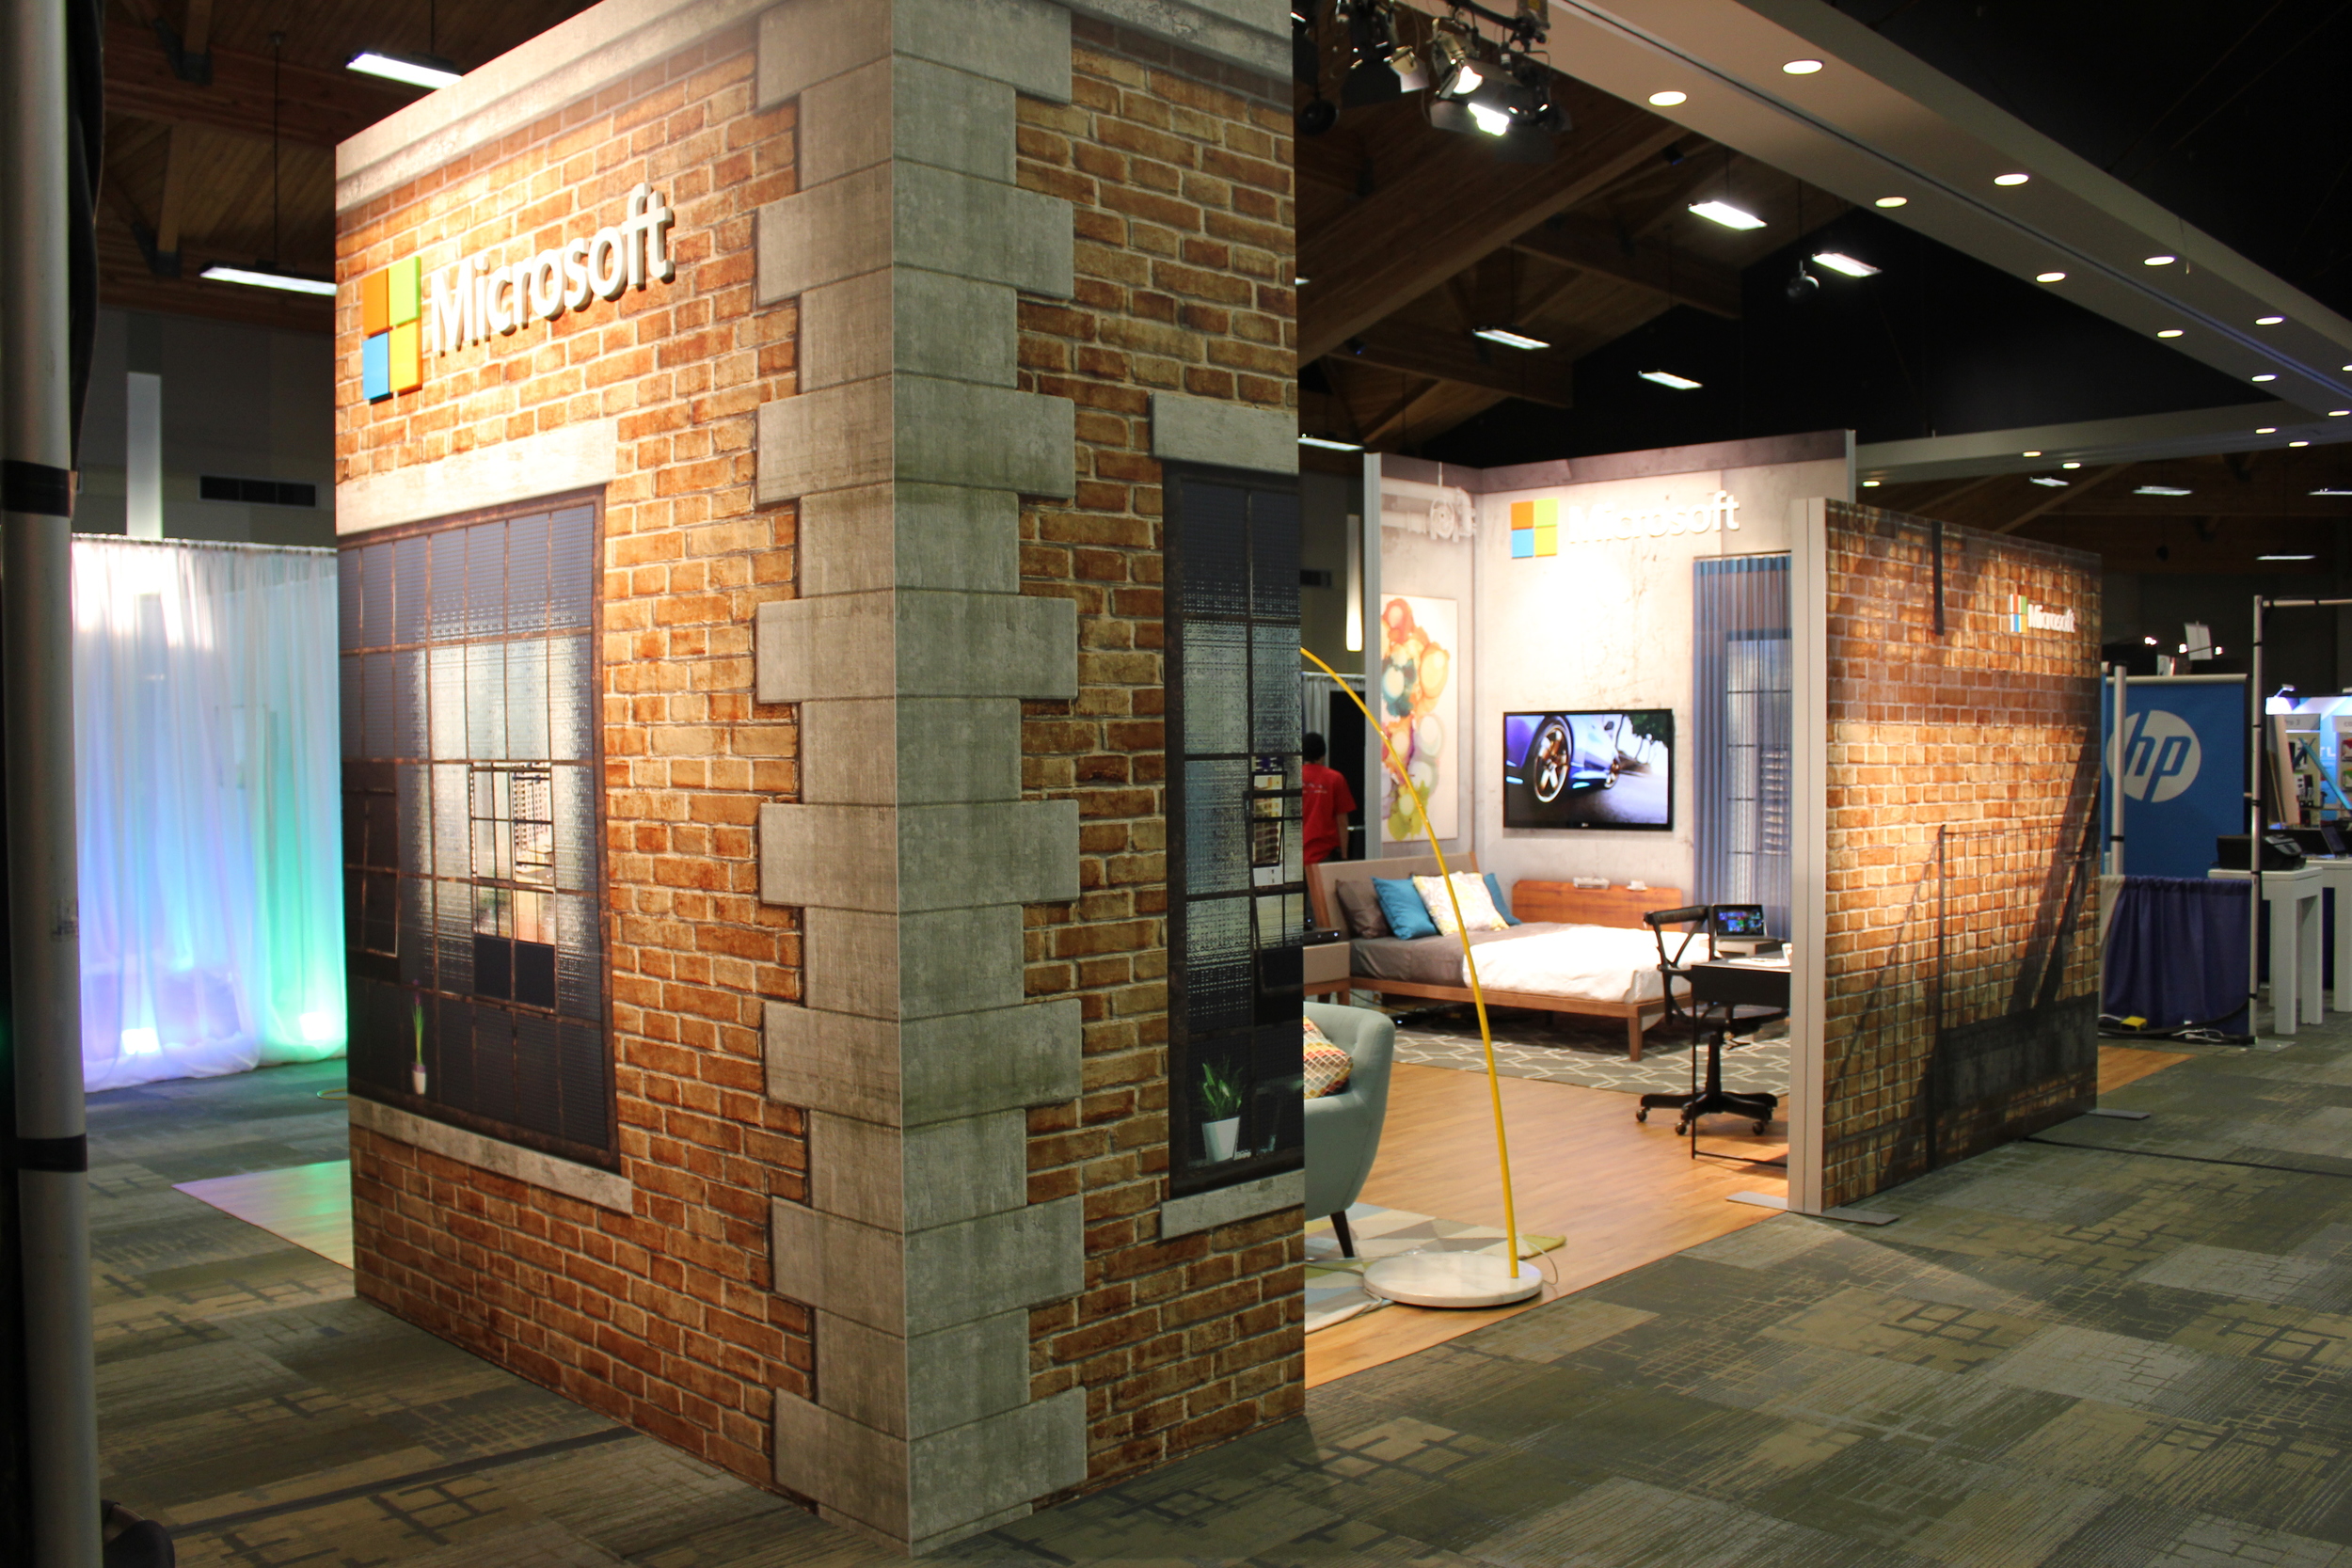 Large digitally printed graphics, wood flooring, and designer staging allows Microsoft to showcase product in an experiential way